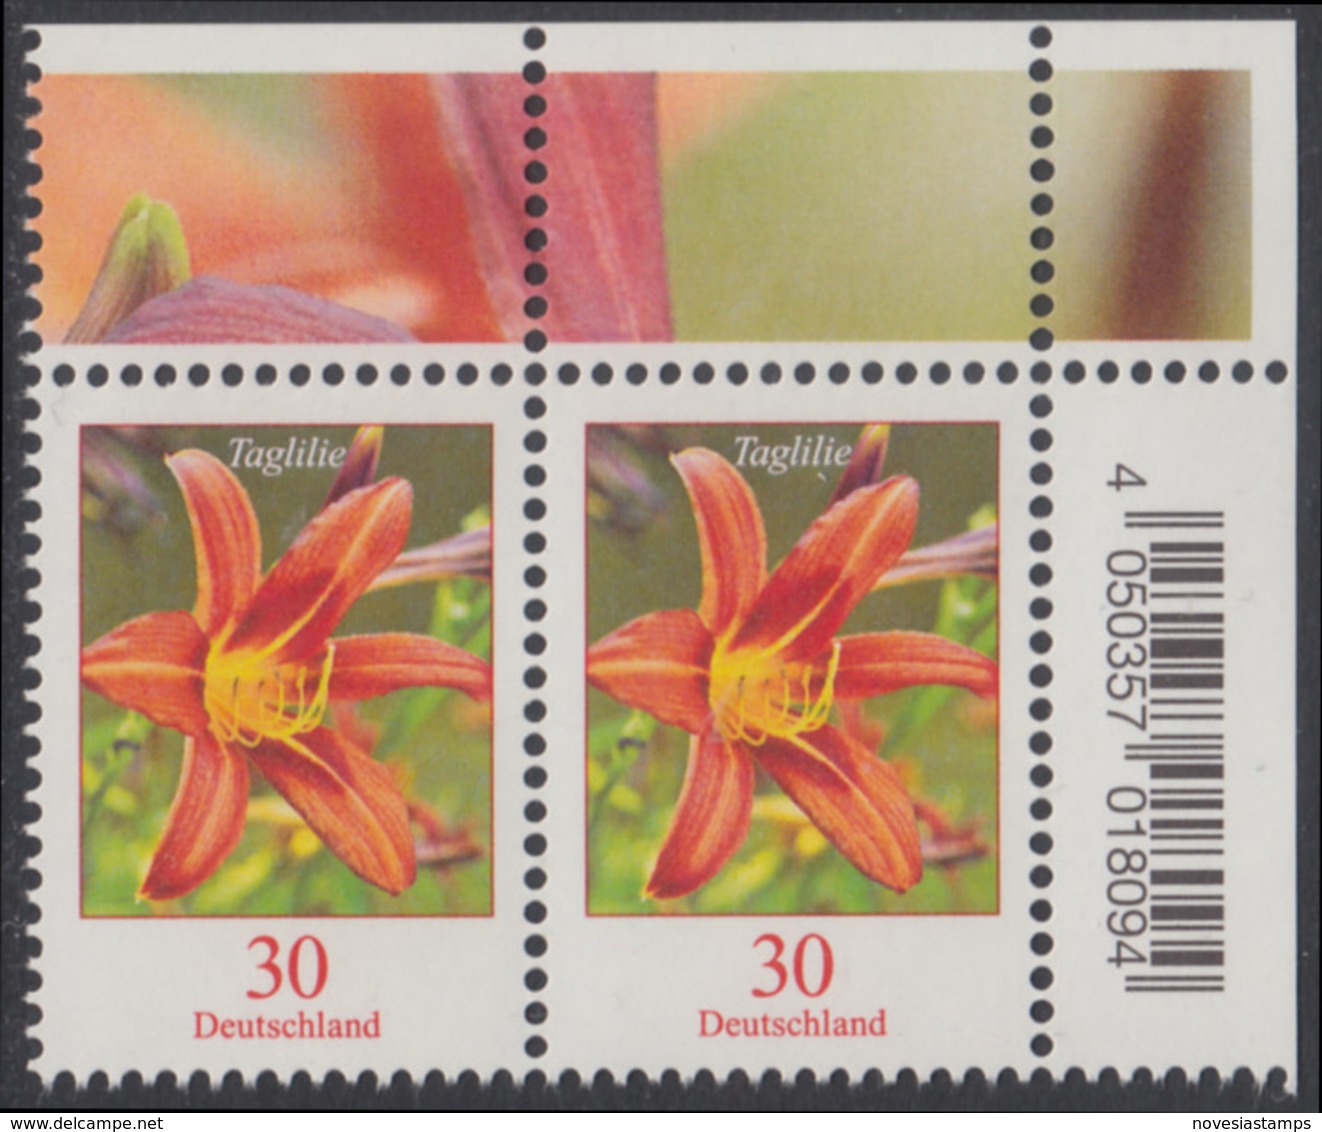 !a! GERMANY 2020 Mi. 3509 MNH Horiz. PAIR From Upper Right Corner - Flowers: Daylily - Unused Stamps